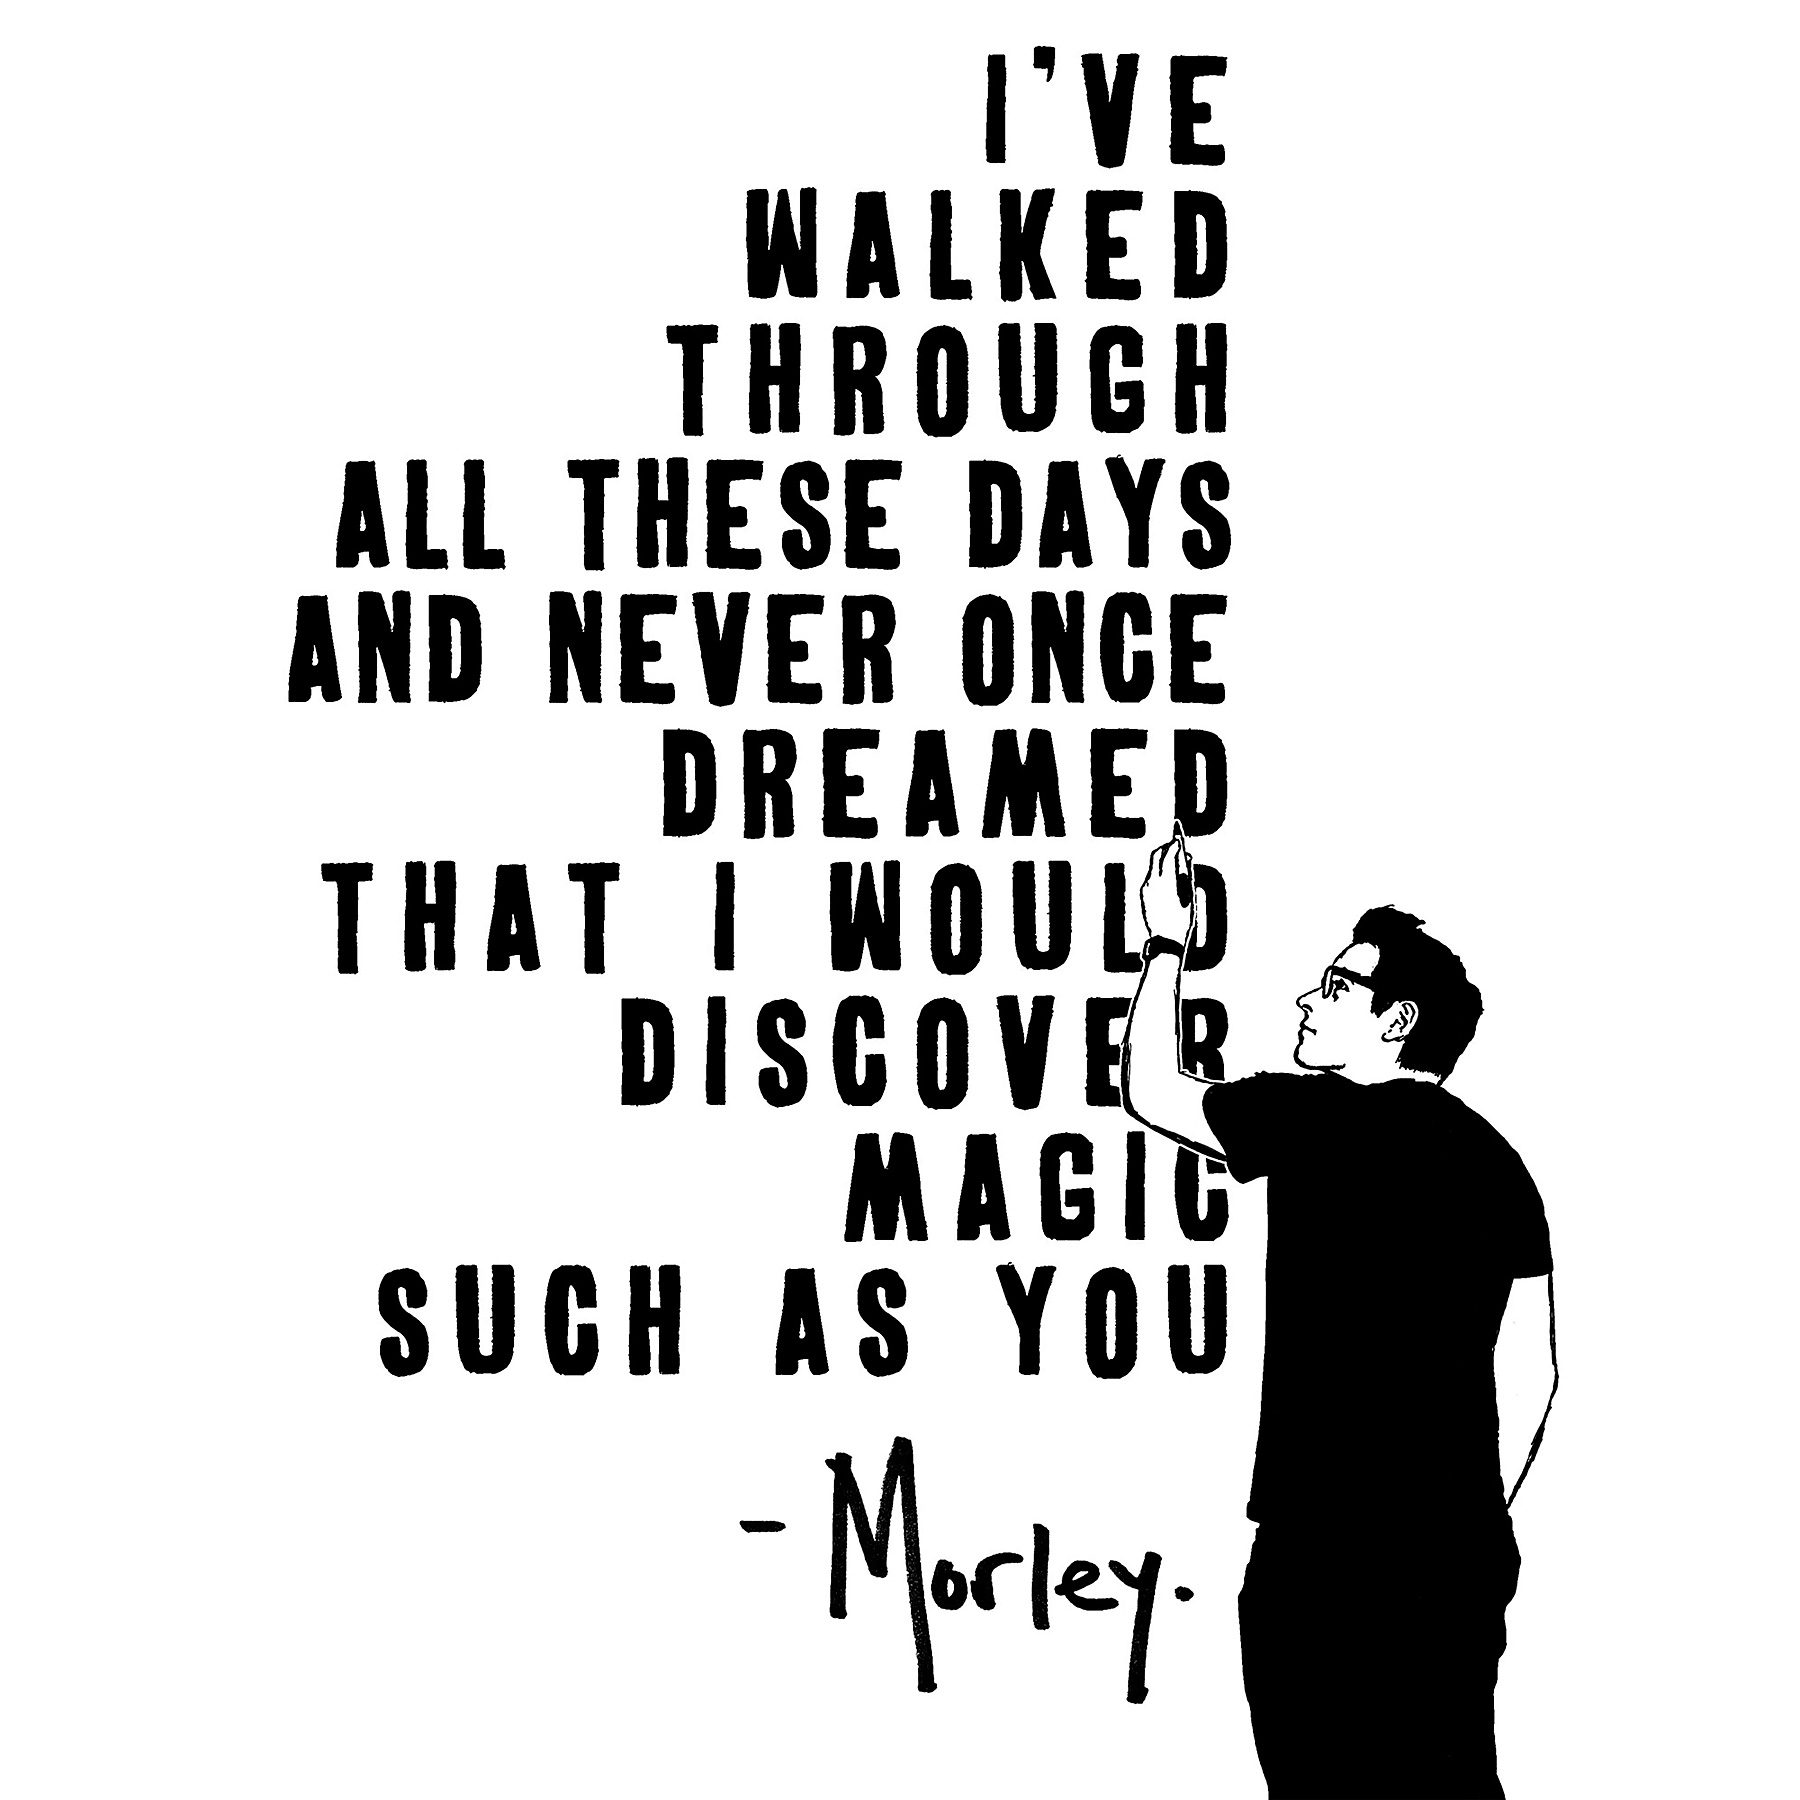 'Magic Such As You' by street artist Morley